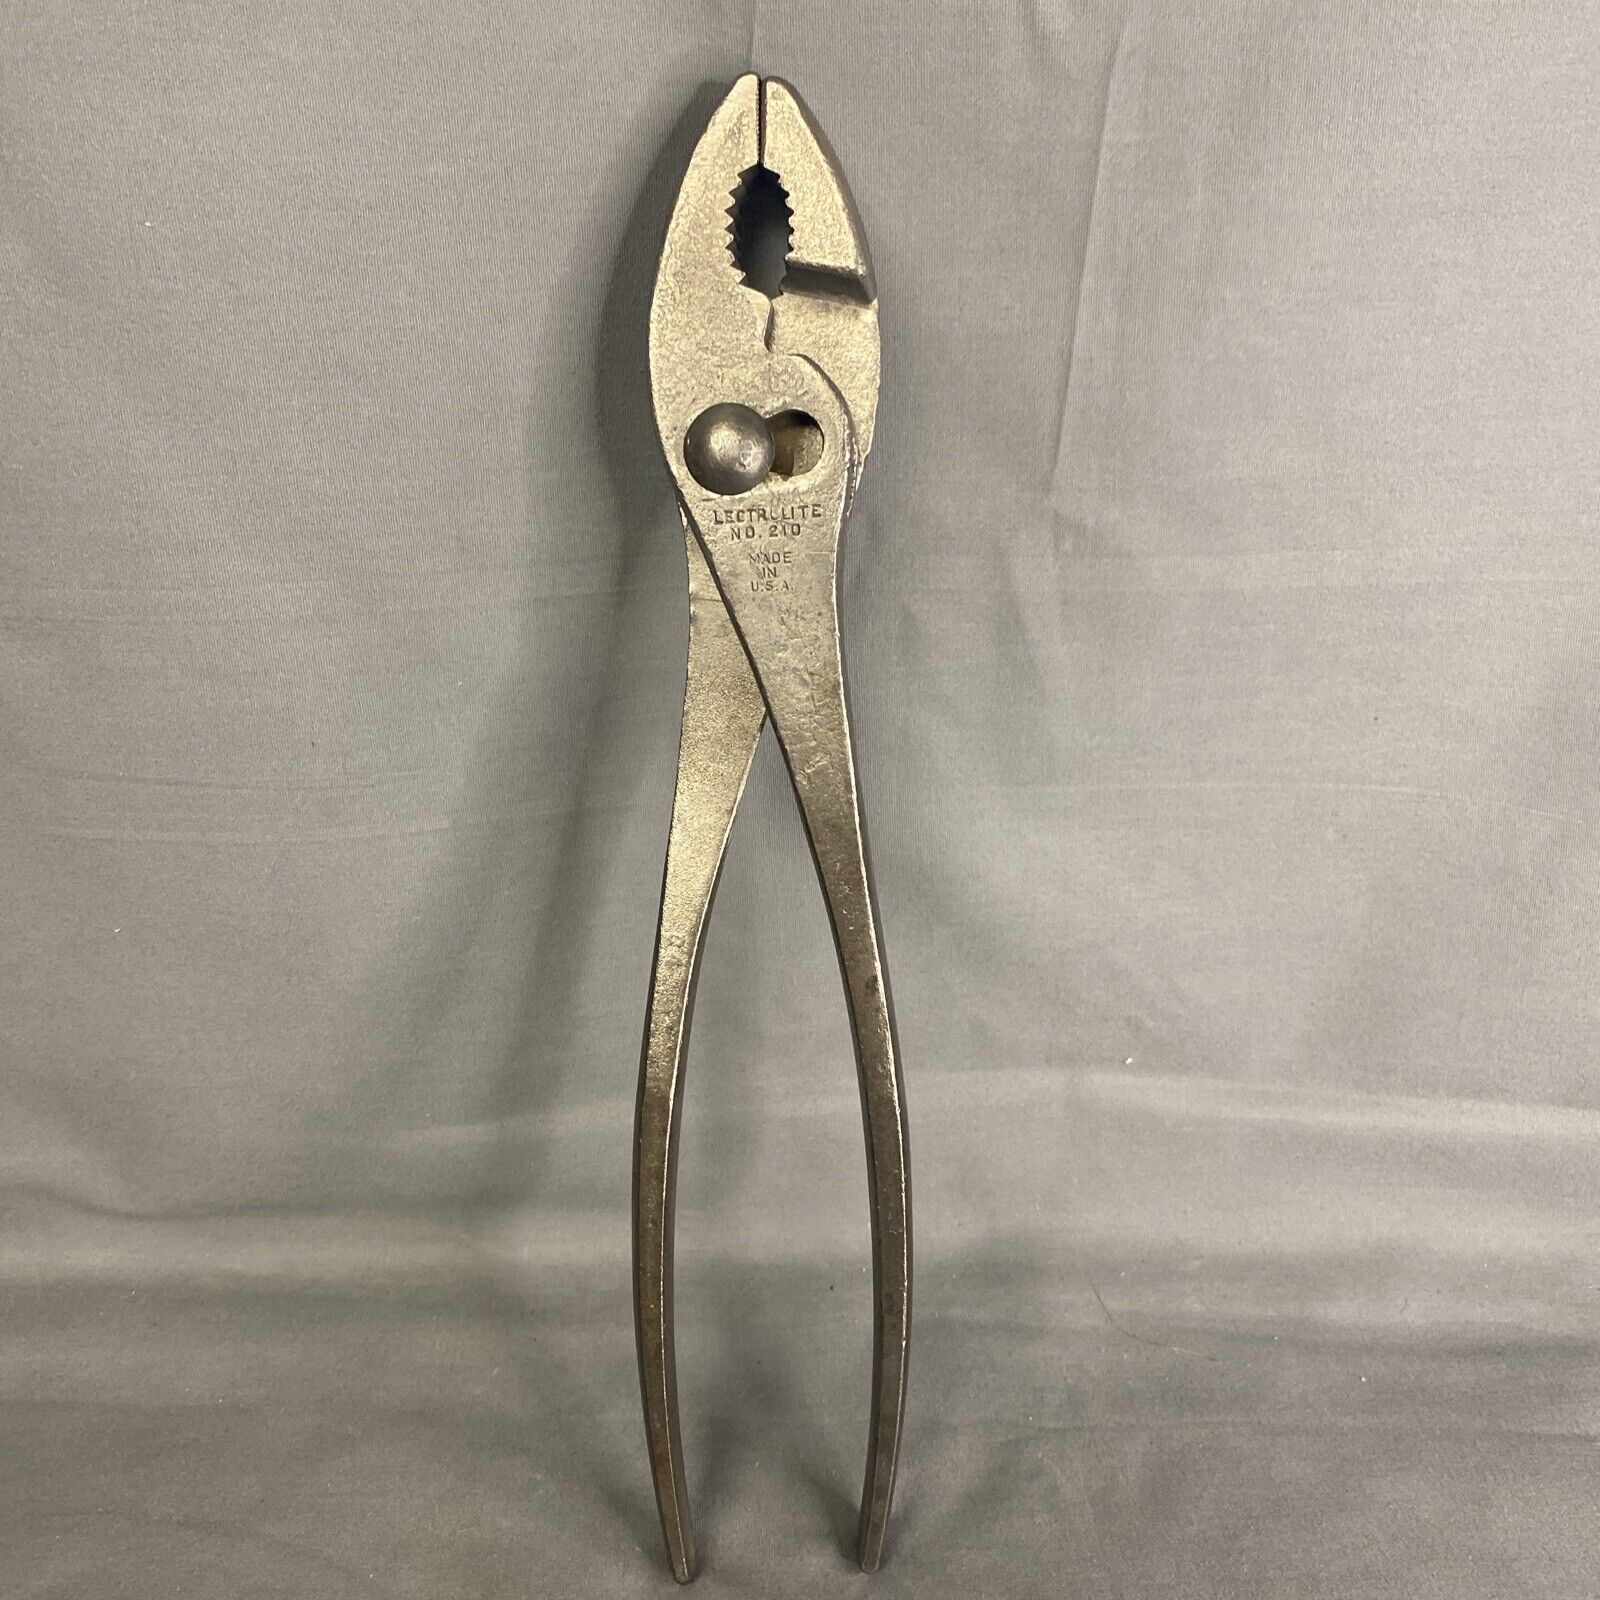 Vintage Lectrolite No.210 10” Slip Joint Pliers Made in USA